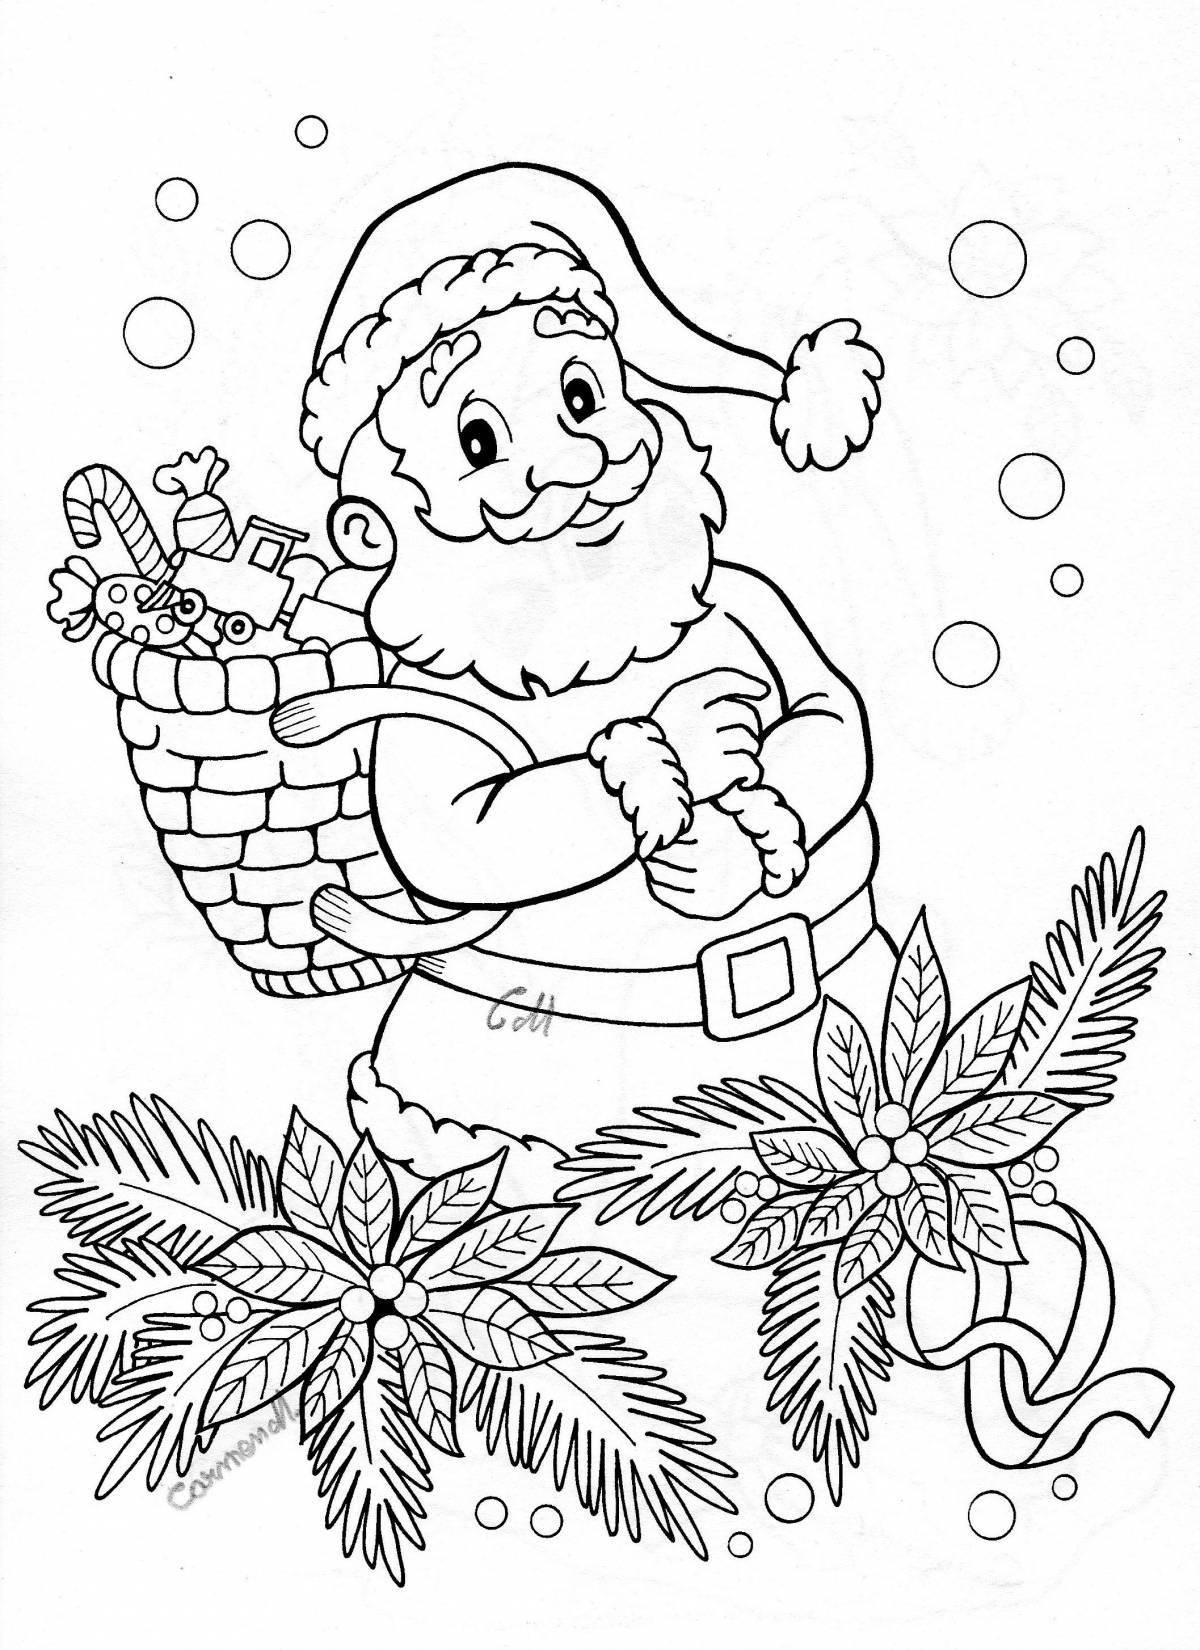 A decorated coloring book with a Christmas card